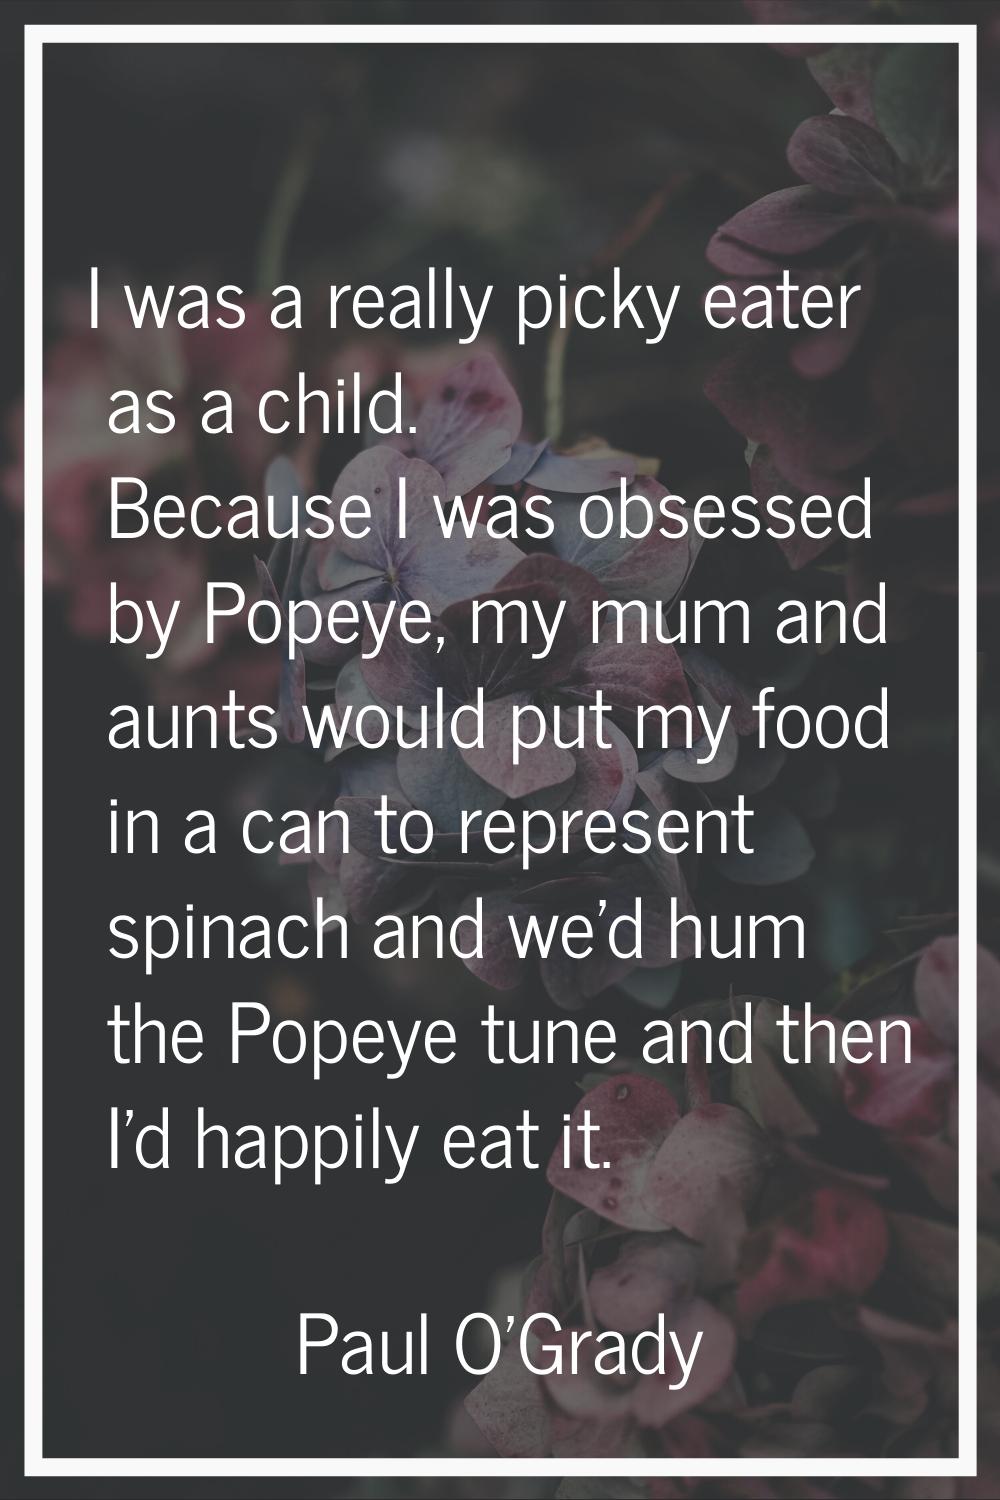 I was a really picky eater as a child. Because I was obsessed by Popeye, my mum and aunts would put